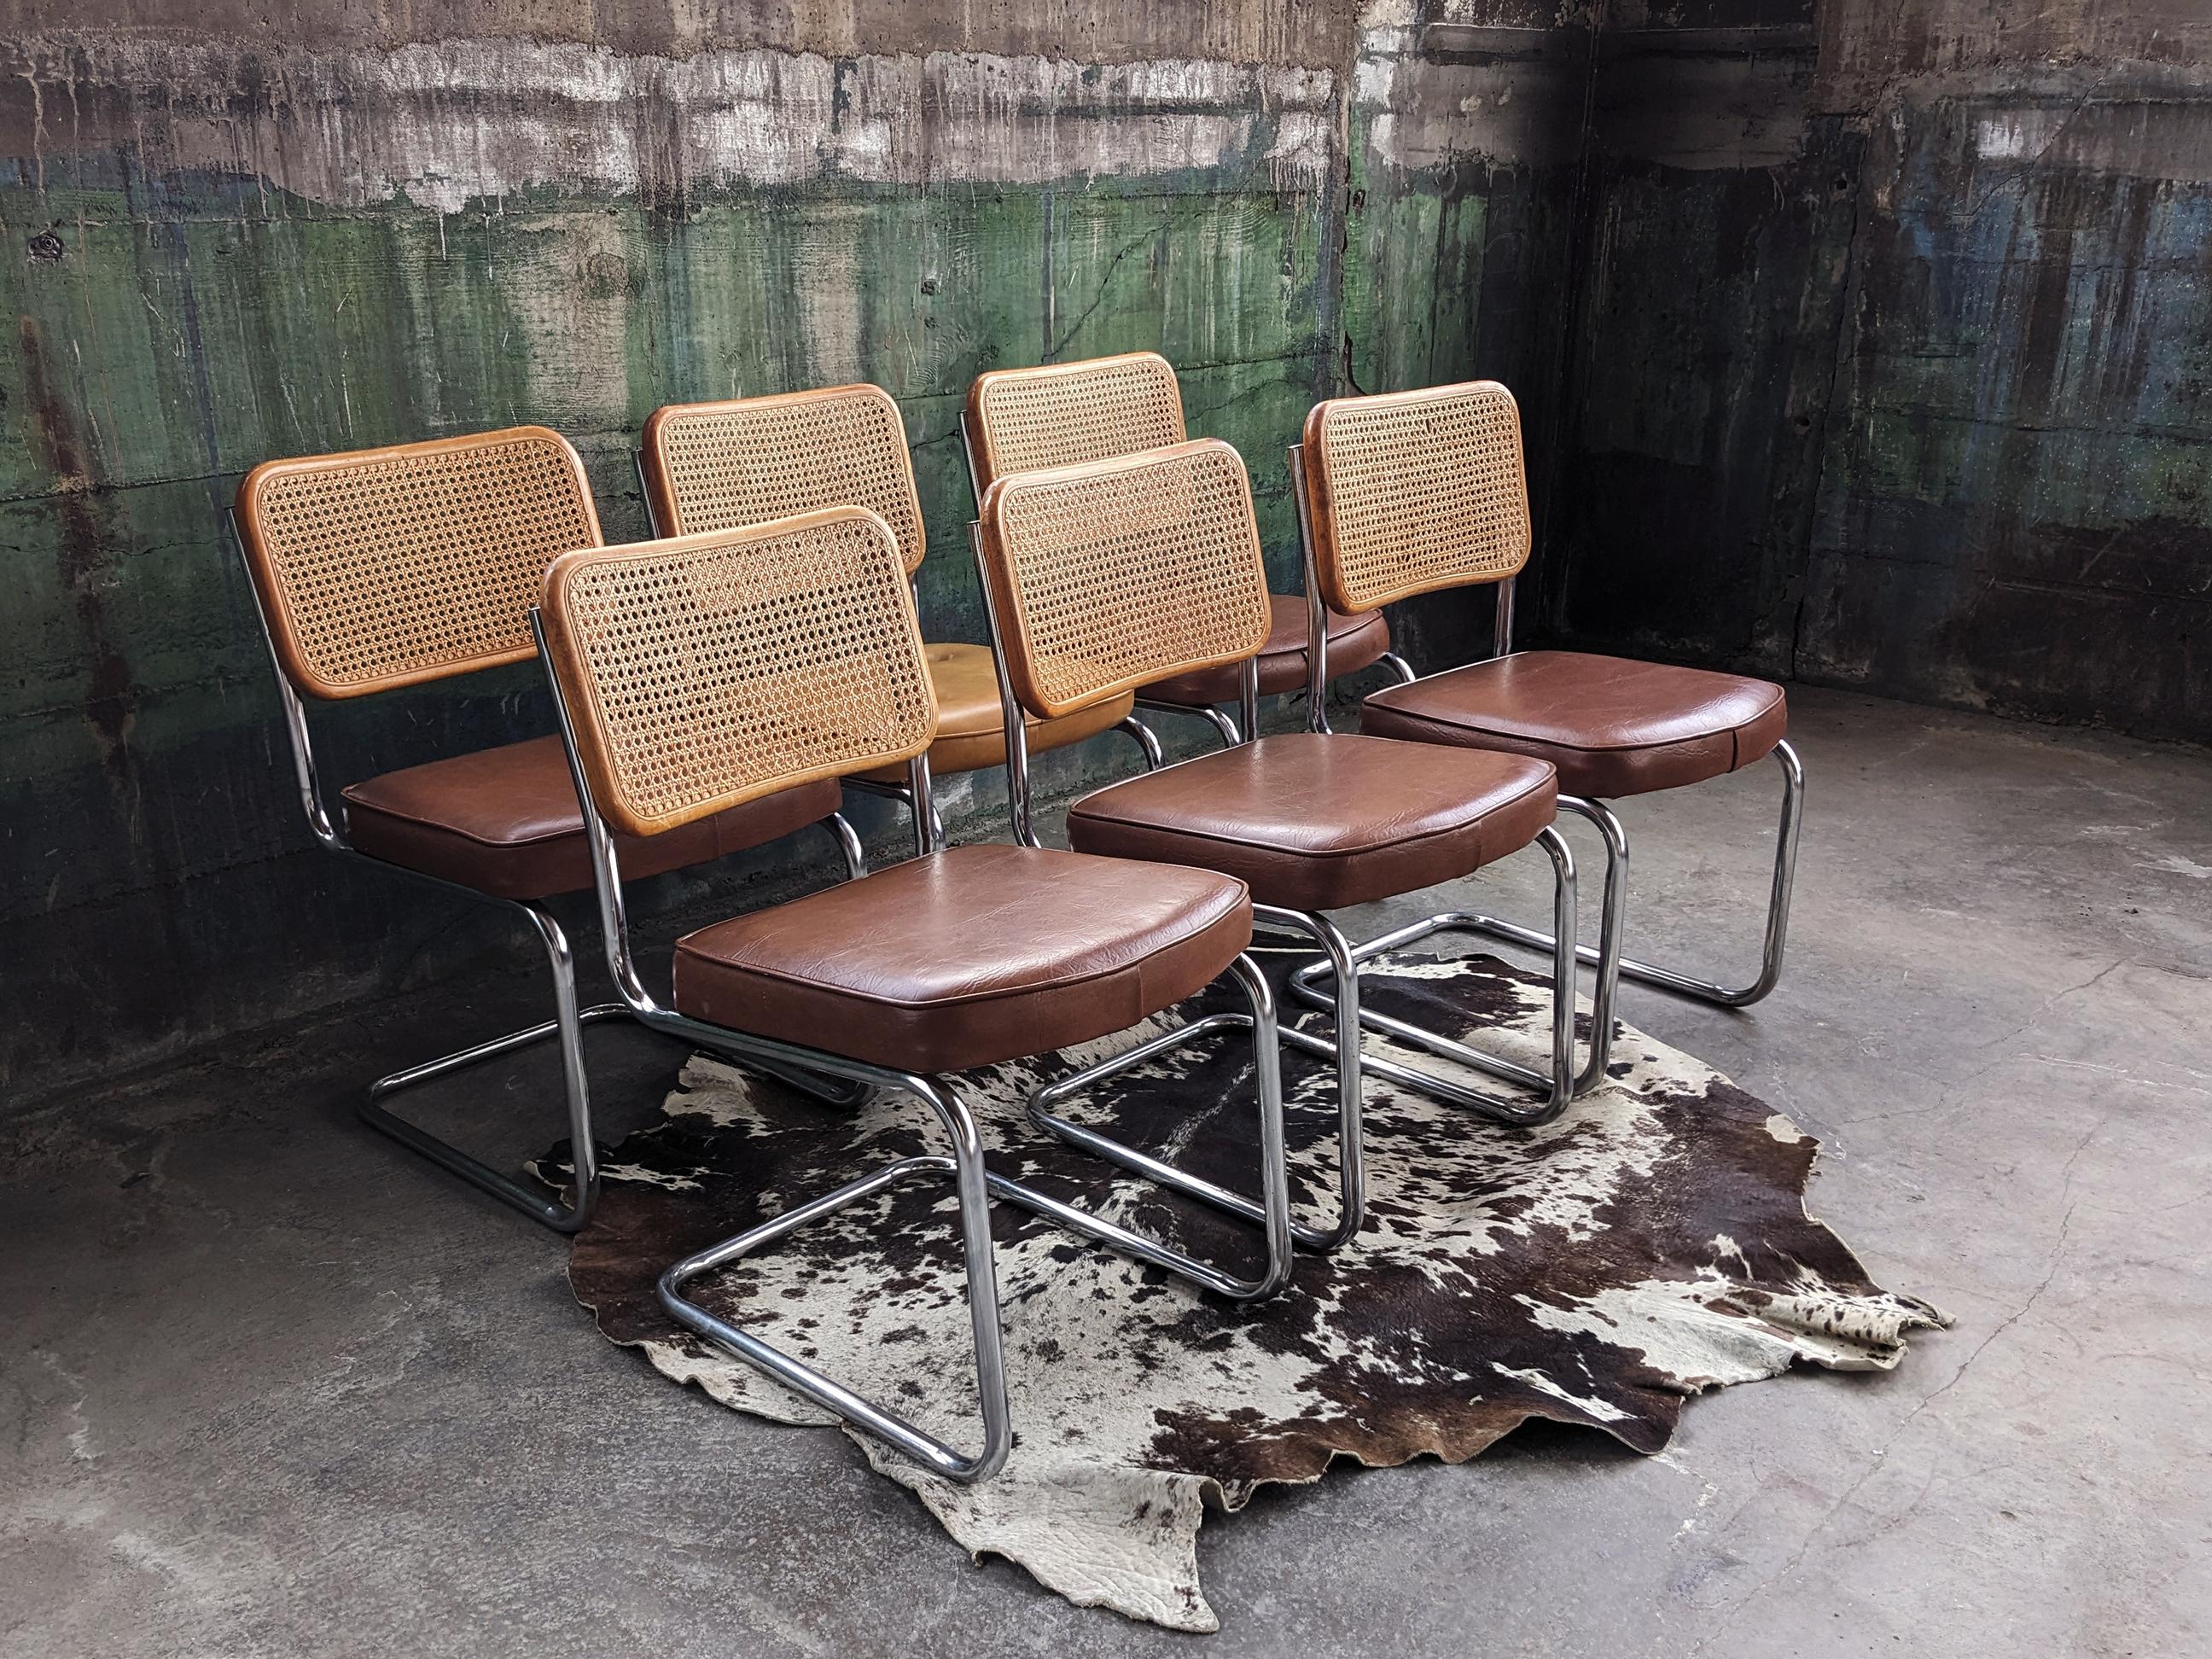 A beautiful set of 6 original Italian Breuer Cesca chairs with Wood framed seat and back with birds eye cane seat backs, cushioned seats and a chrome plated metal frame. This set is in very good vintage condition. Strong, comfortable set.

One seat